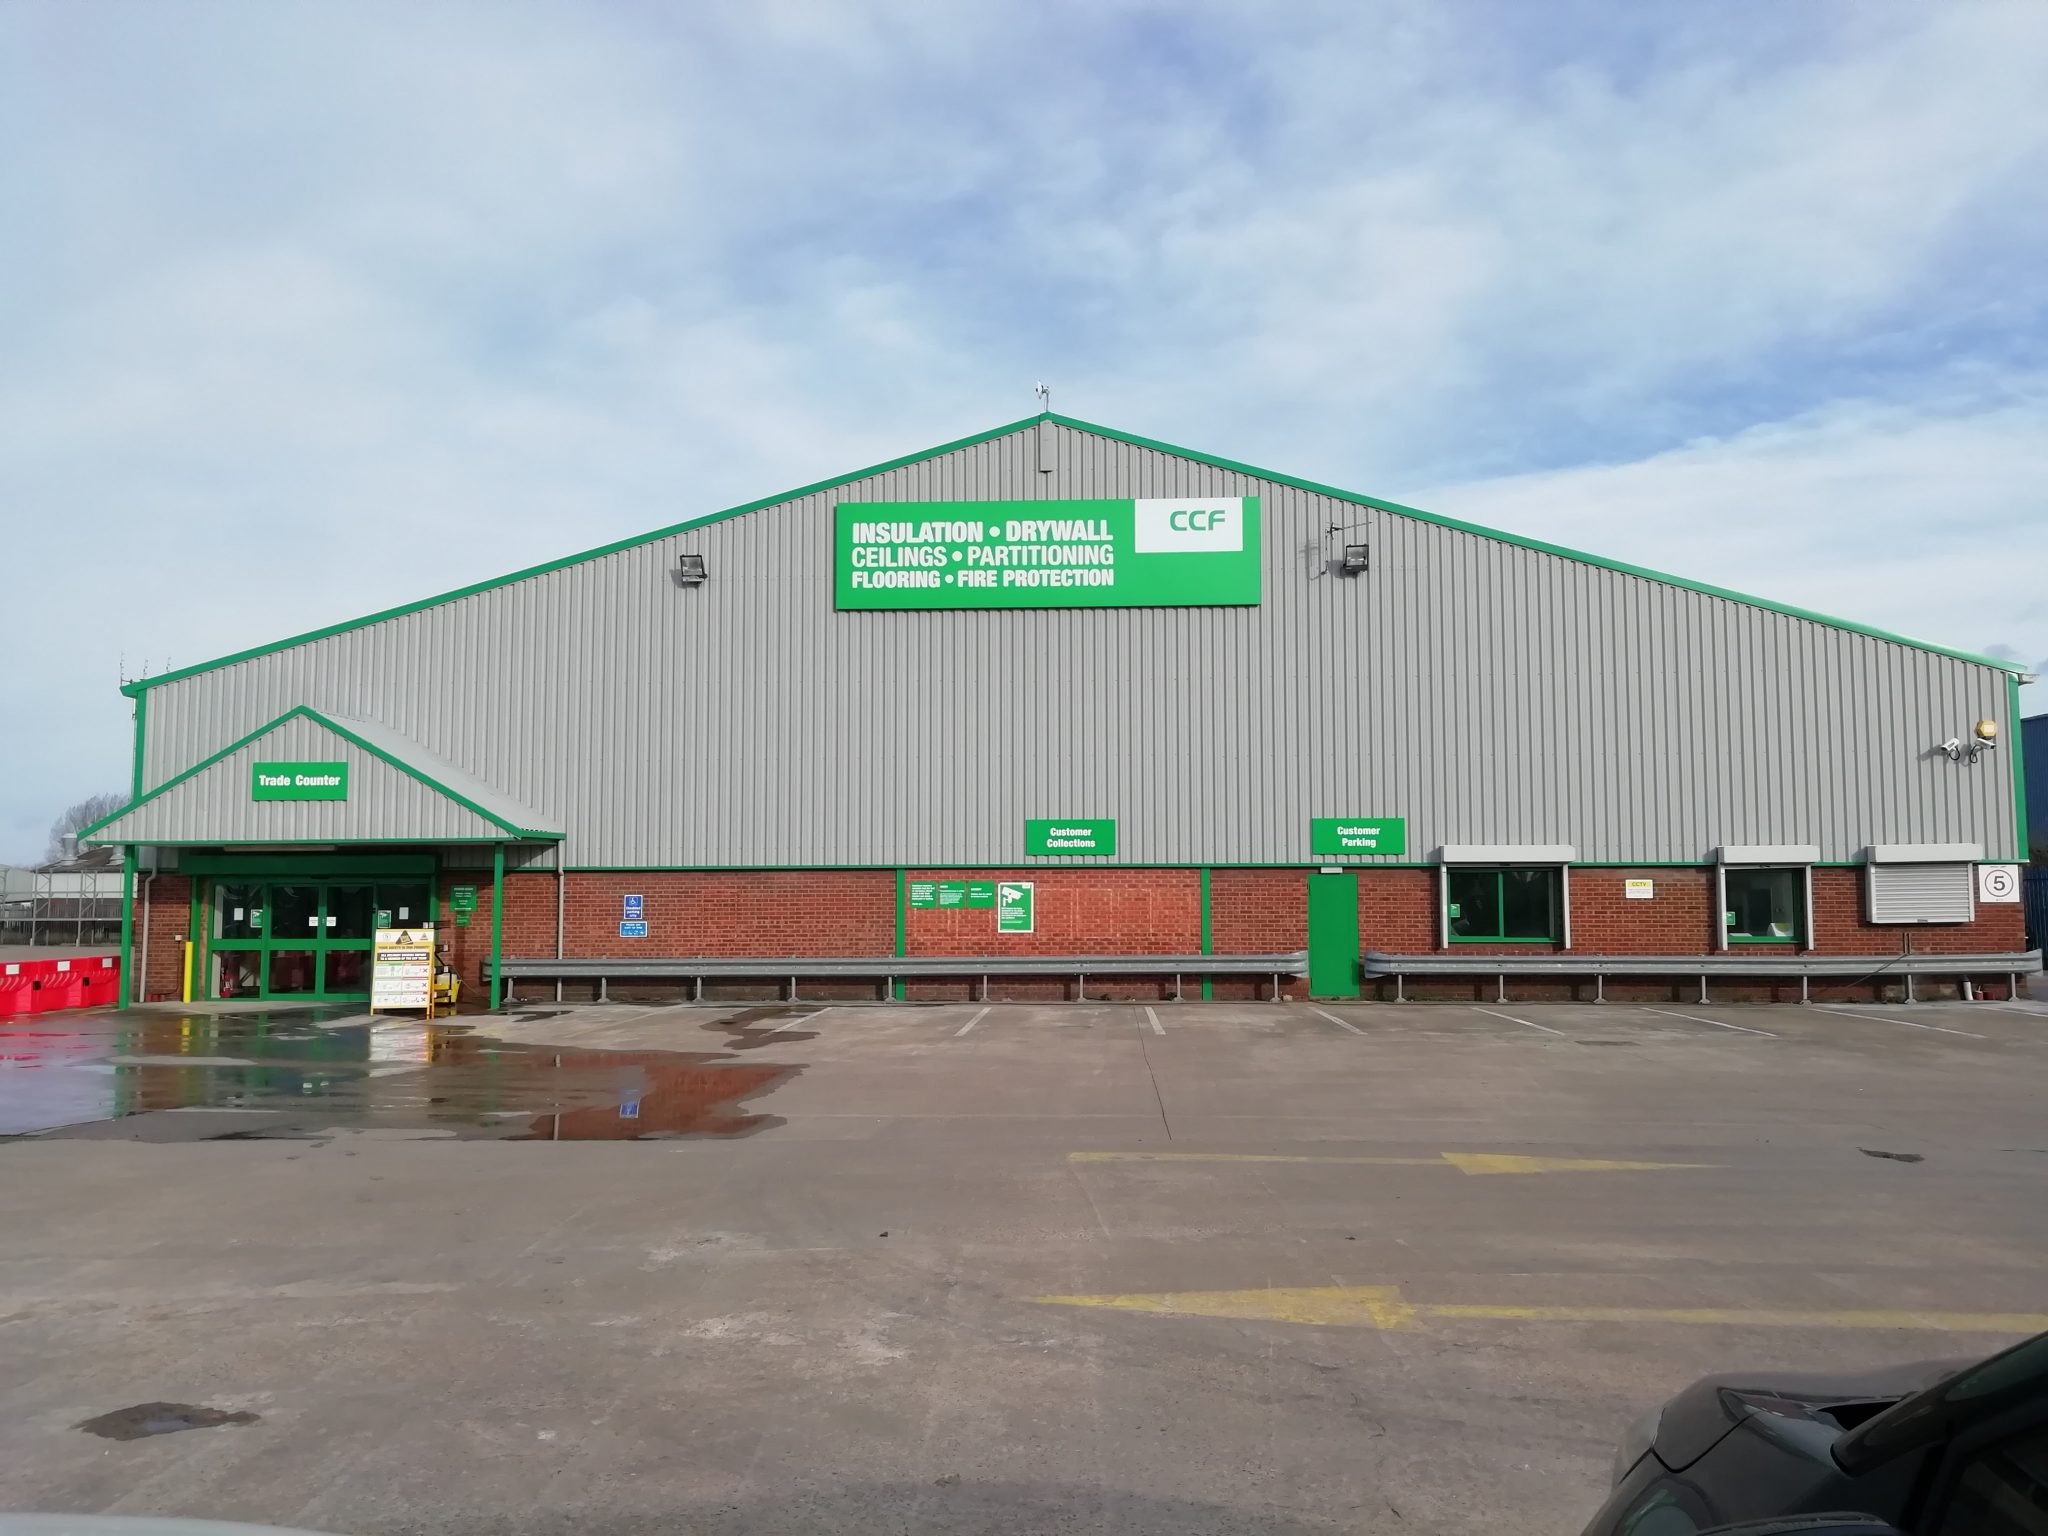 CCF opens new branch in Scunthorpe